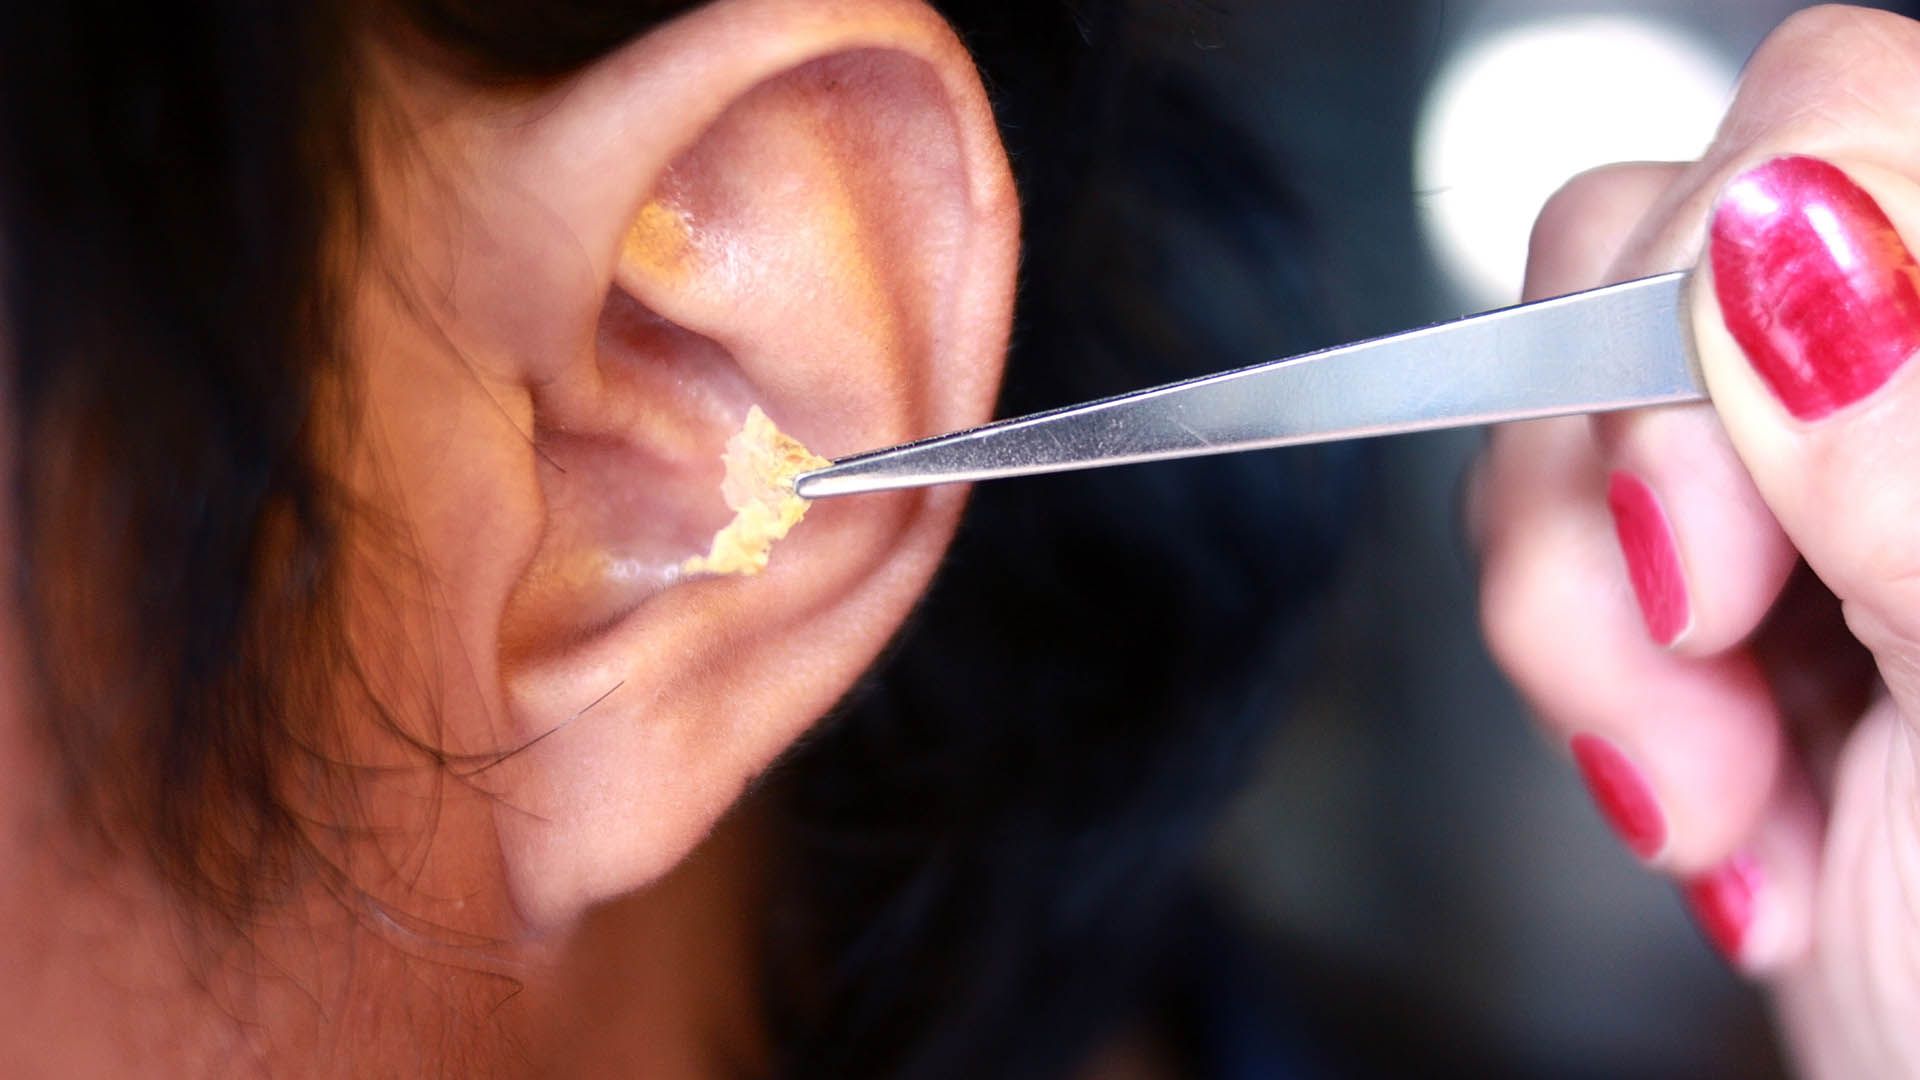 Earwax Removal